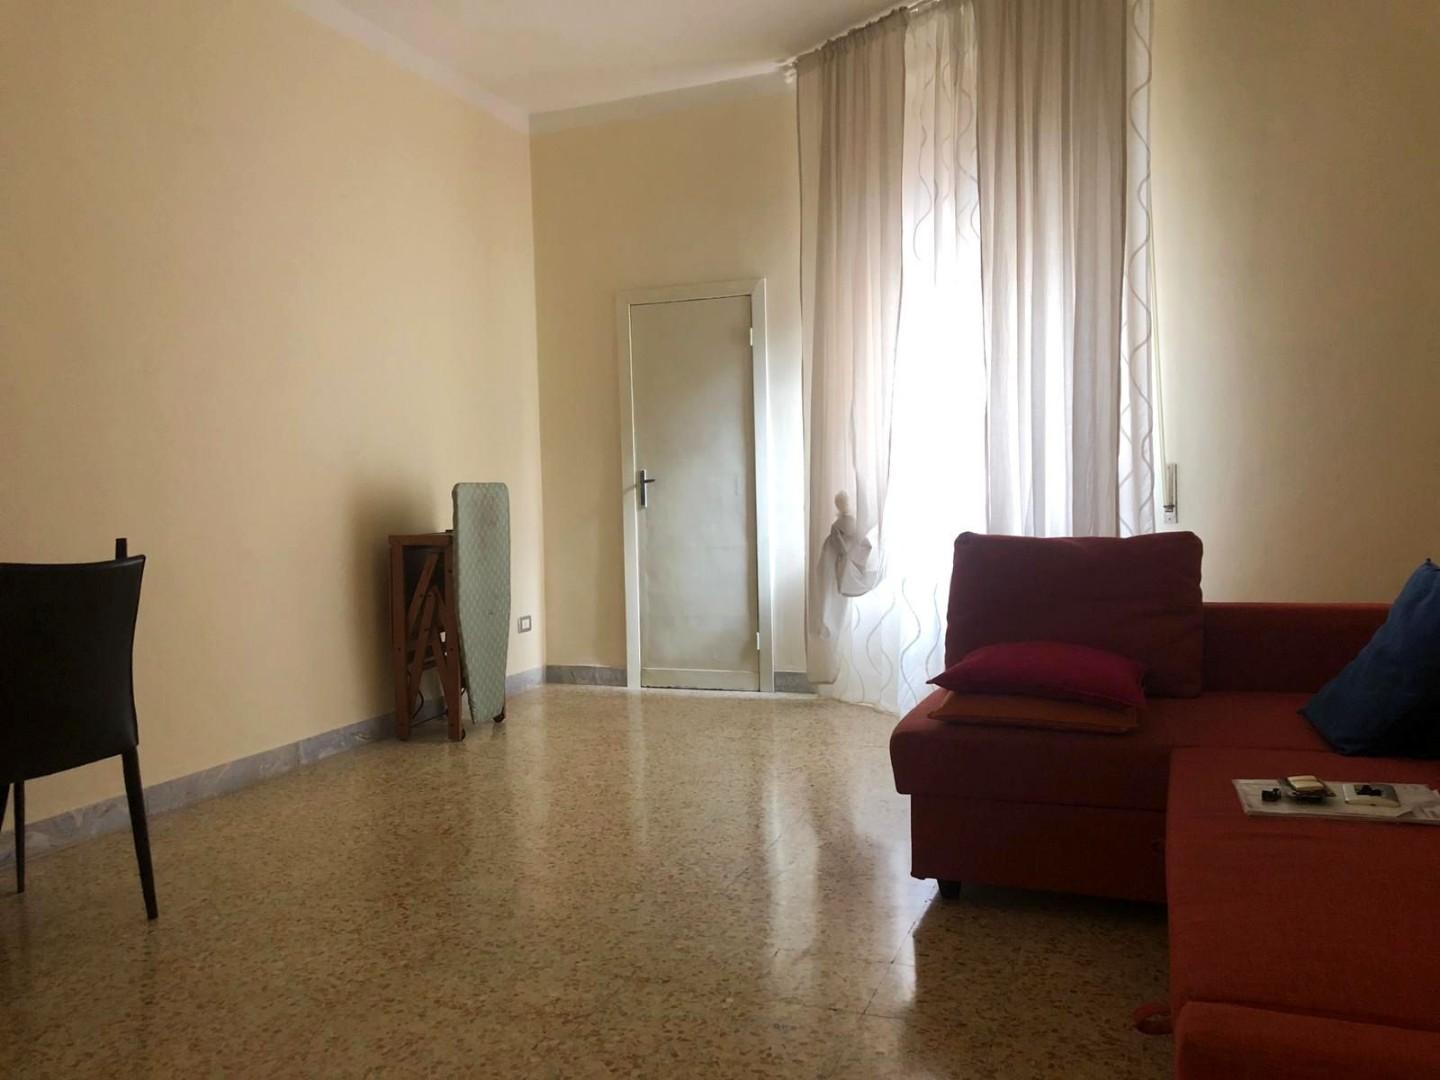 Apartment for rent in Siena